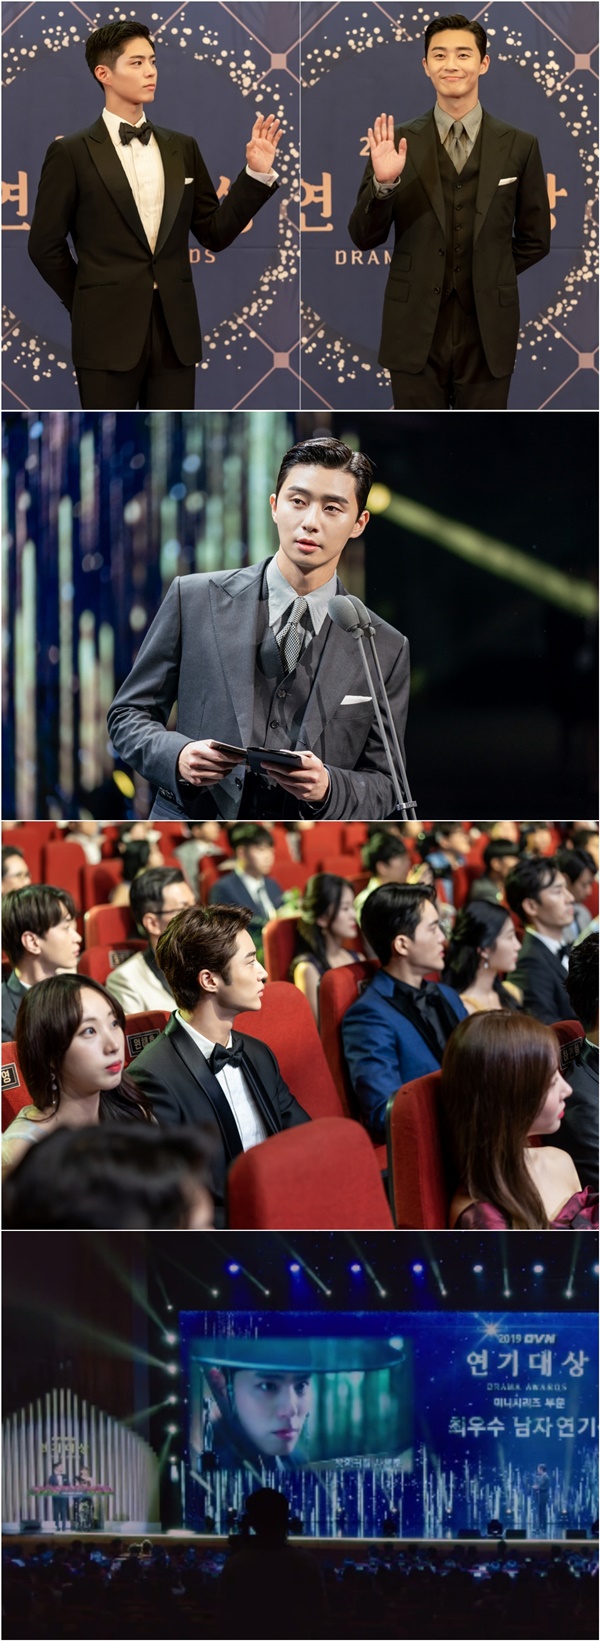 Youth records Park Bo-gum and Park Seo-joons special encounter swells.TvNs wreath-laying drama Youth Records (playwright Ha Myung-hee and director An Gil-ho) unveiled the scene of a spectacular year-end awards ceremony on June 6, just before the second season.  In addition to Park Bo-gum, who is on the red carpet in the spotlight, park Seo-joon, who appears as his predecessor and top star Song Min-so, raises expectations.Sahye-jun, struggling to achieve his dream, opened the Shusu flower path.  Despite the ploy of his former company, Lee Tae-soo (Lee Chang-hoon), Hye-jun Sa hye-jun became a rising star by appearing in the medical KBS Drama Special Gateway with top star Lee Hyun-so.  The romance between Sahye-jun and Seung-ha (Park So-dam) who pledged constant love in the midst of a busy life added excitement.  There were still crises on days when everything seemed to be fine.  Two young men who were moving toward tomorrow without being frustrated by the reality.  There are growing questions about whether we can protect our dreams and love in the face of different realities and many variables.Meanwhile, the dazzling visuals of Sahye-jun, who attended the acting awards ceremony, catch the eye in the photos released.  The unique aura of Park Seo-joon, a senior model of Sahye-jun and a top star, also excites.  It is also interesting to see the tense expressions of Won Hae-hyo (Woo-seok) and Park Do-ha (Kim Kun-woo) waiting to be announced at the Best Male Acting Award.  The result is a question of who will be the best male actor, and whether Song Min-so, who has a special relationship with Sahye-jun, can win the trophy to Sahye-jun.In the ninth episode, which airs today (May 5), The performance of Sahye-jun, who wins as an actor, is depicted.  Earlier, Sahye-jun announced that he wanted to play The Return of the King, a historical drama with a work instead of the kbs drama special, a romance that was guaranteed to be popular in the next installment.  His move as a rising star adds to his expectations.  The Youth records crew is at the beginning of The Hye-Juns era.  In particular, Park Seo-joon has made a special appearance and the second act is hotter.  We look forward to his performance, which will add to the power of disassembly with top star Song Min-so, who has a special relationship with Sahye-jun.Meanwhile, the ninth episode of Youth Records airs today (May 5) at 9pm on tvN.Photo courtesy of tvN